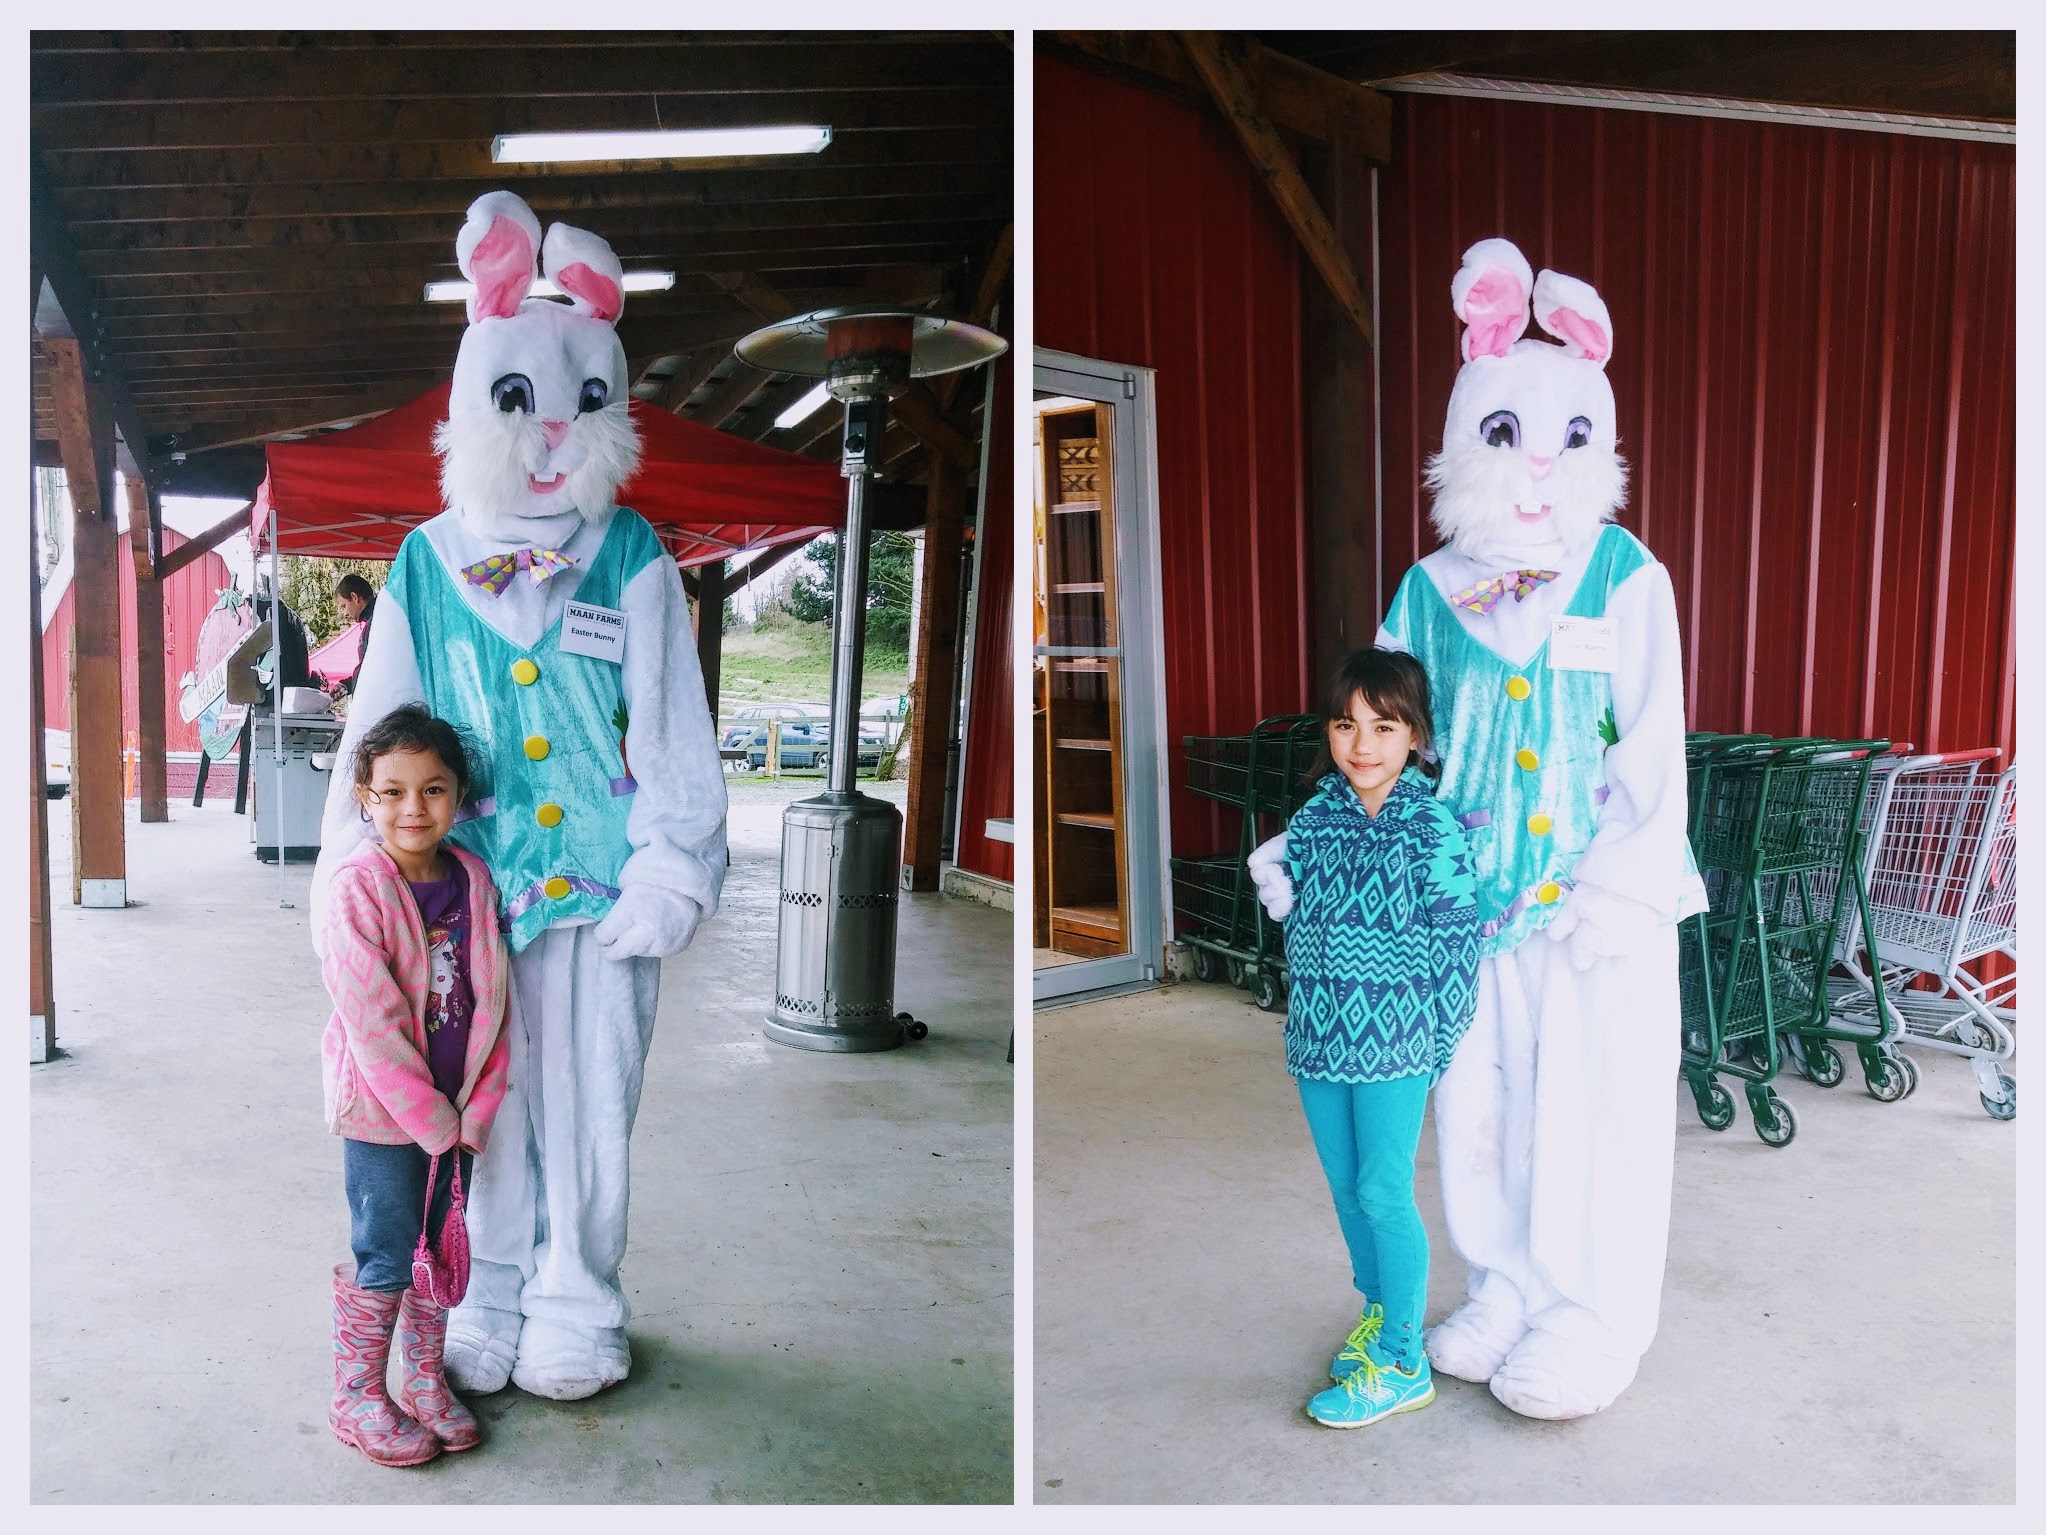 They were both so happy because they were able to take a picture with the lady bunny.